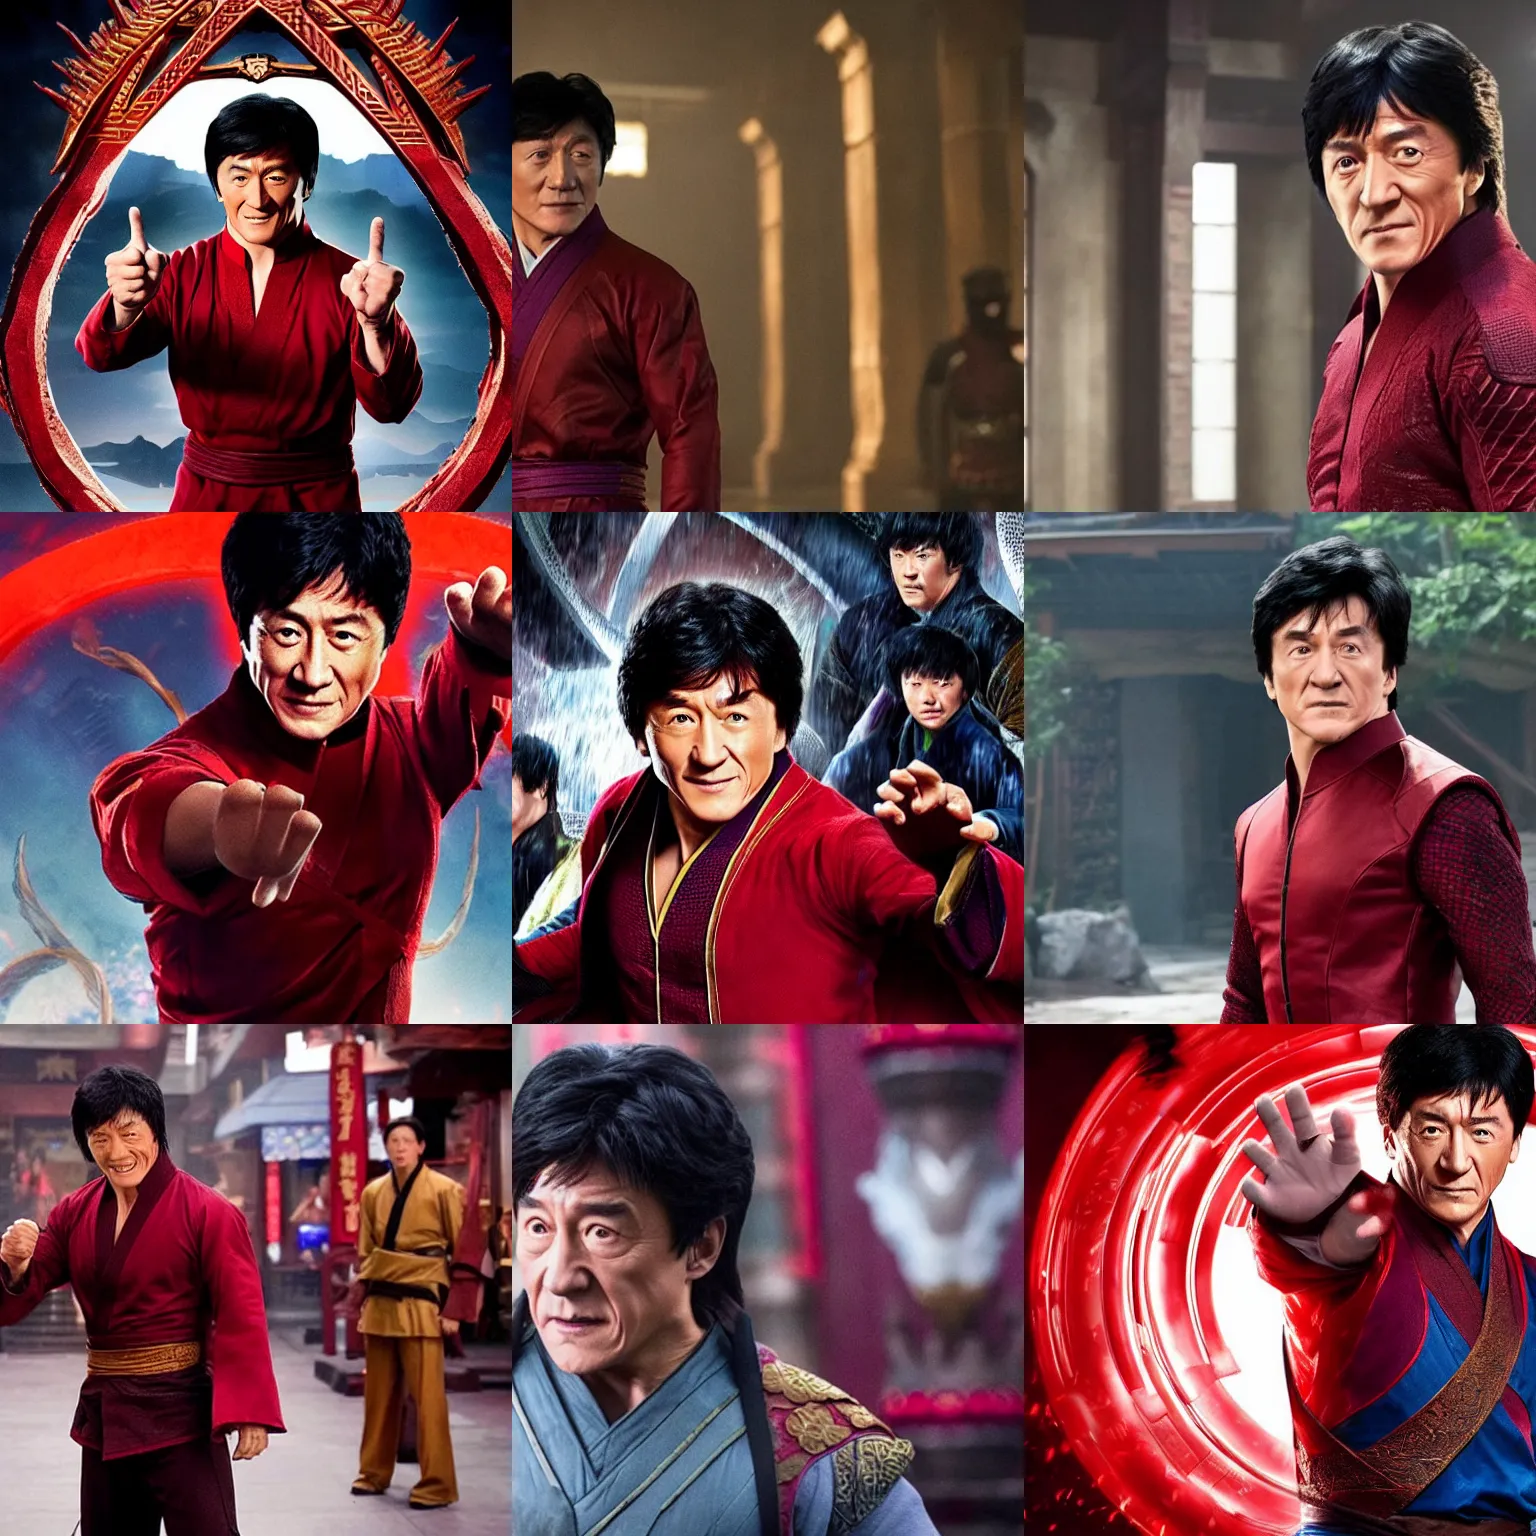 Prompt: jackie chan as shang - chi in the movie shang - chi and the legend of the ten rings